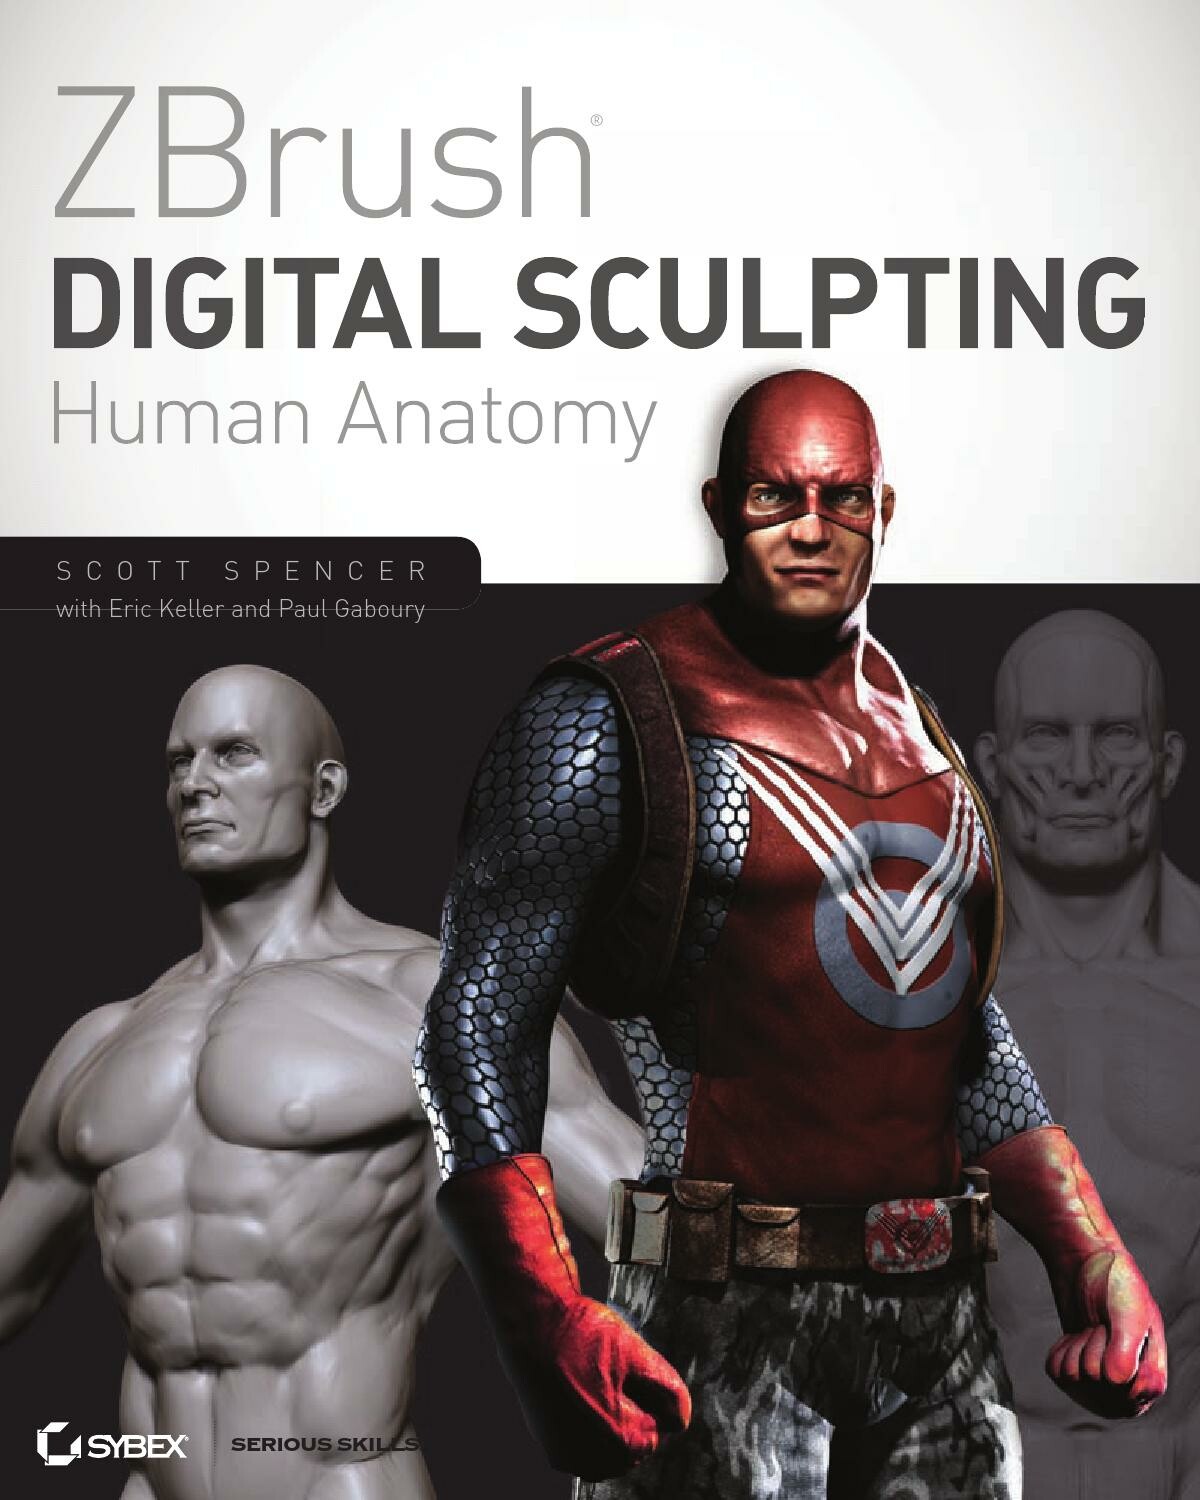 I am proud to be the author of 4 ZBrush textbooks from Sybex / John Wiley and Sons press. The best part about writing these books is hearing from artists who found them helpful in some way toward's their own journey. 